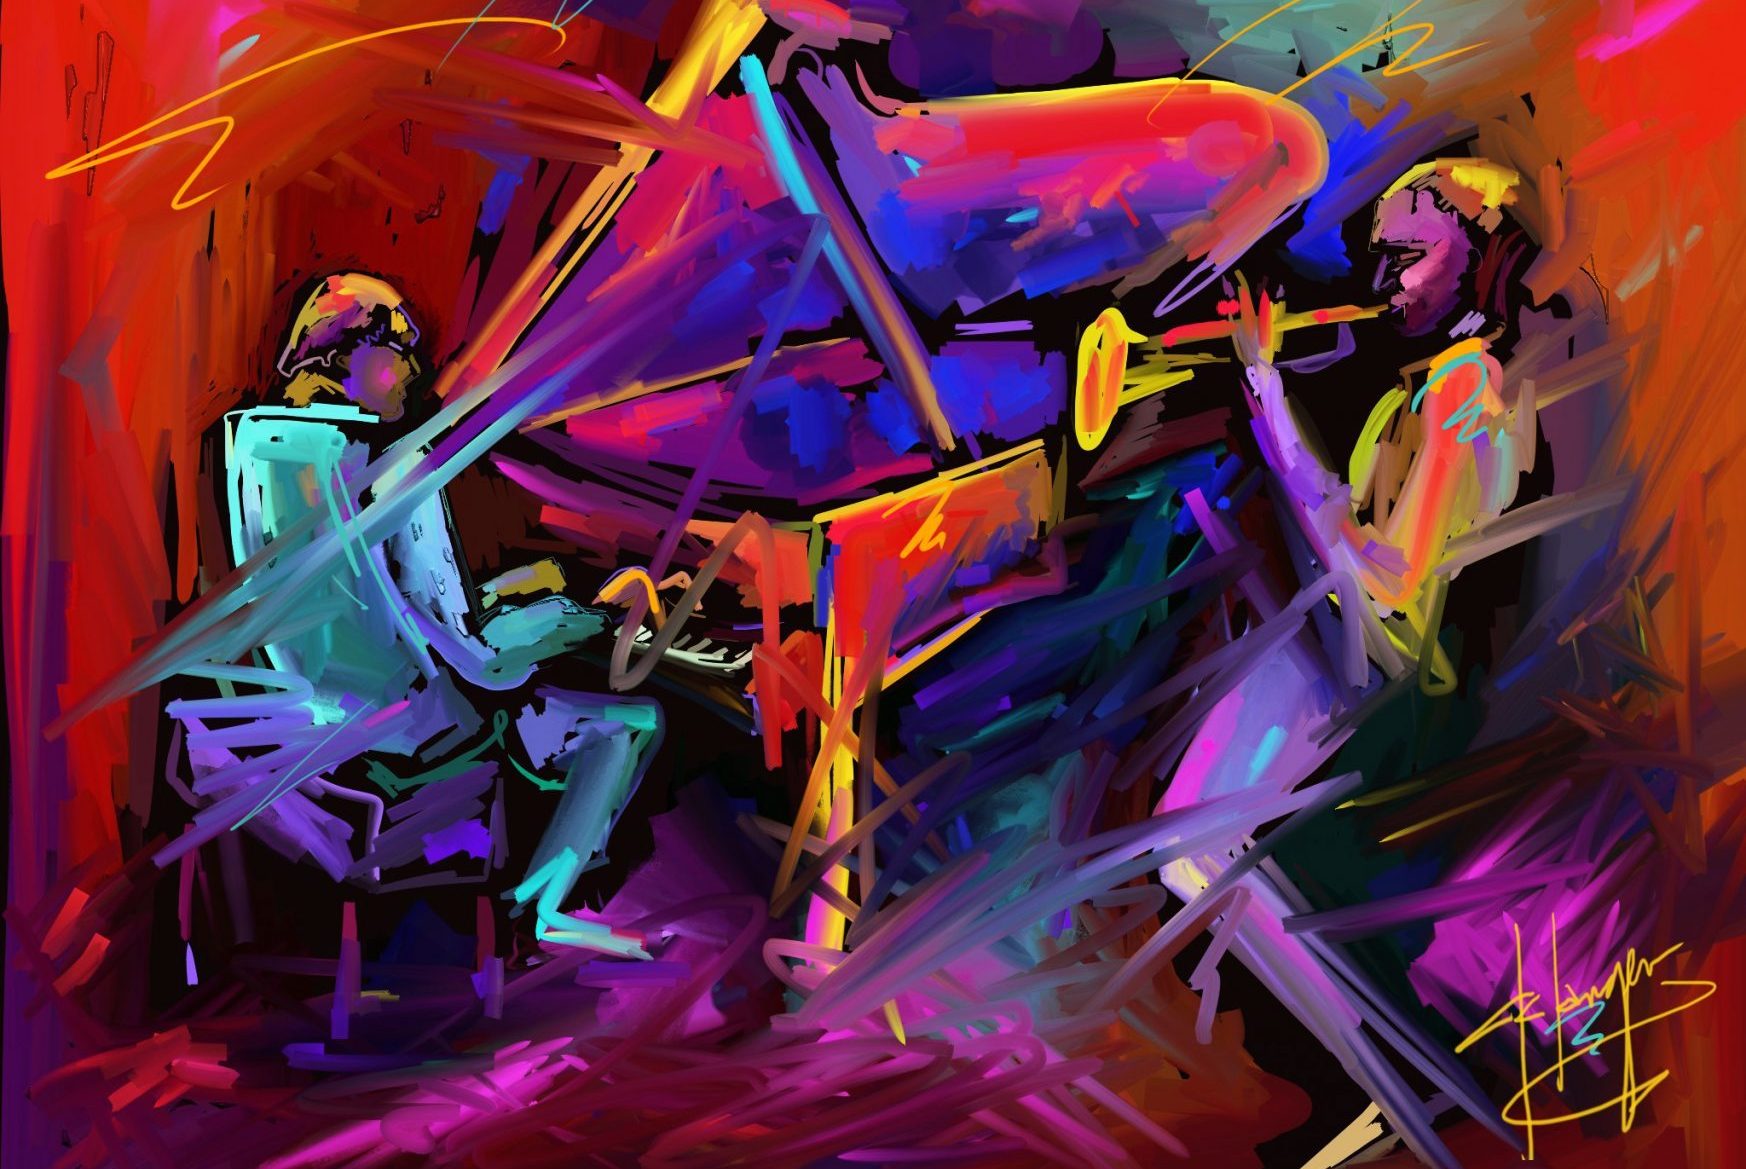 Vivid rendition of a pianist and trumpet player - very brightly coloured and slightly abstract